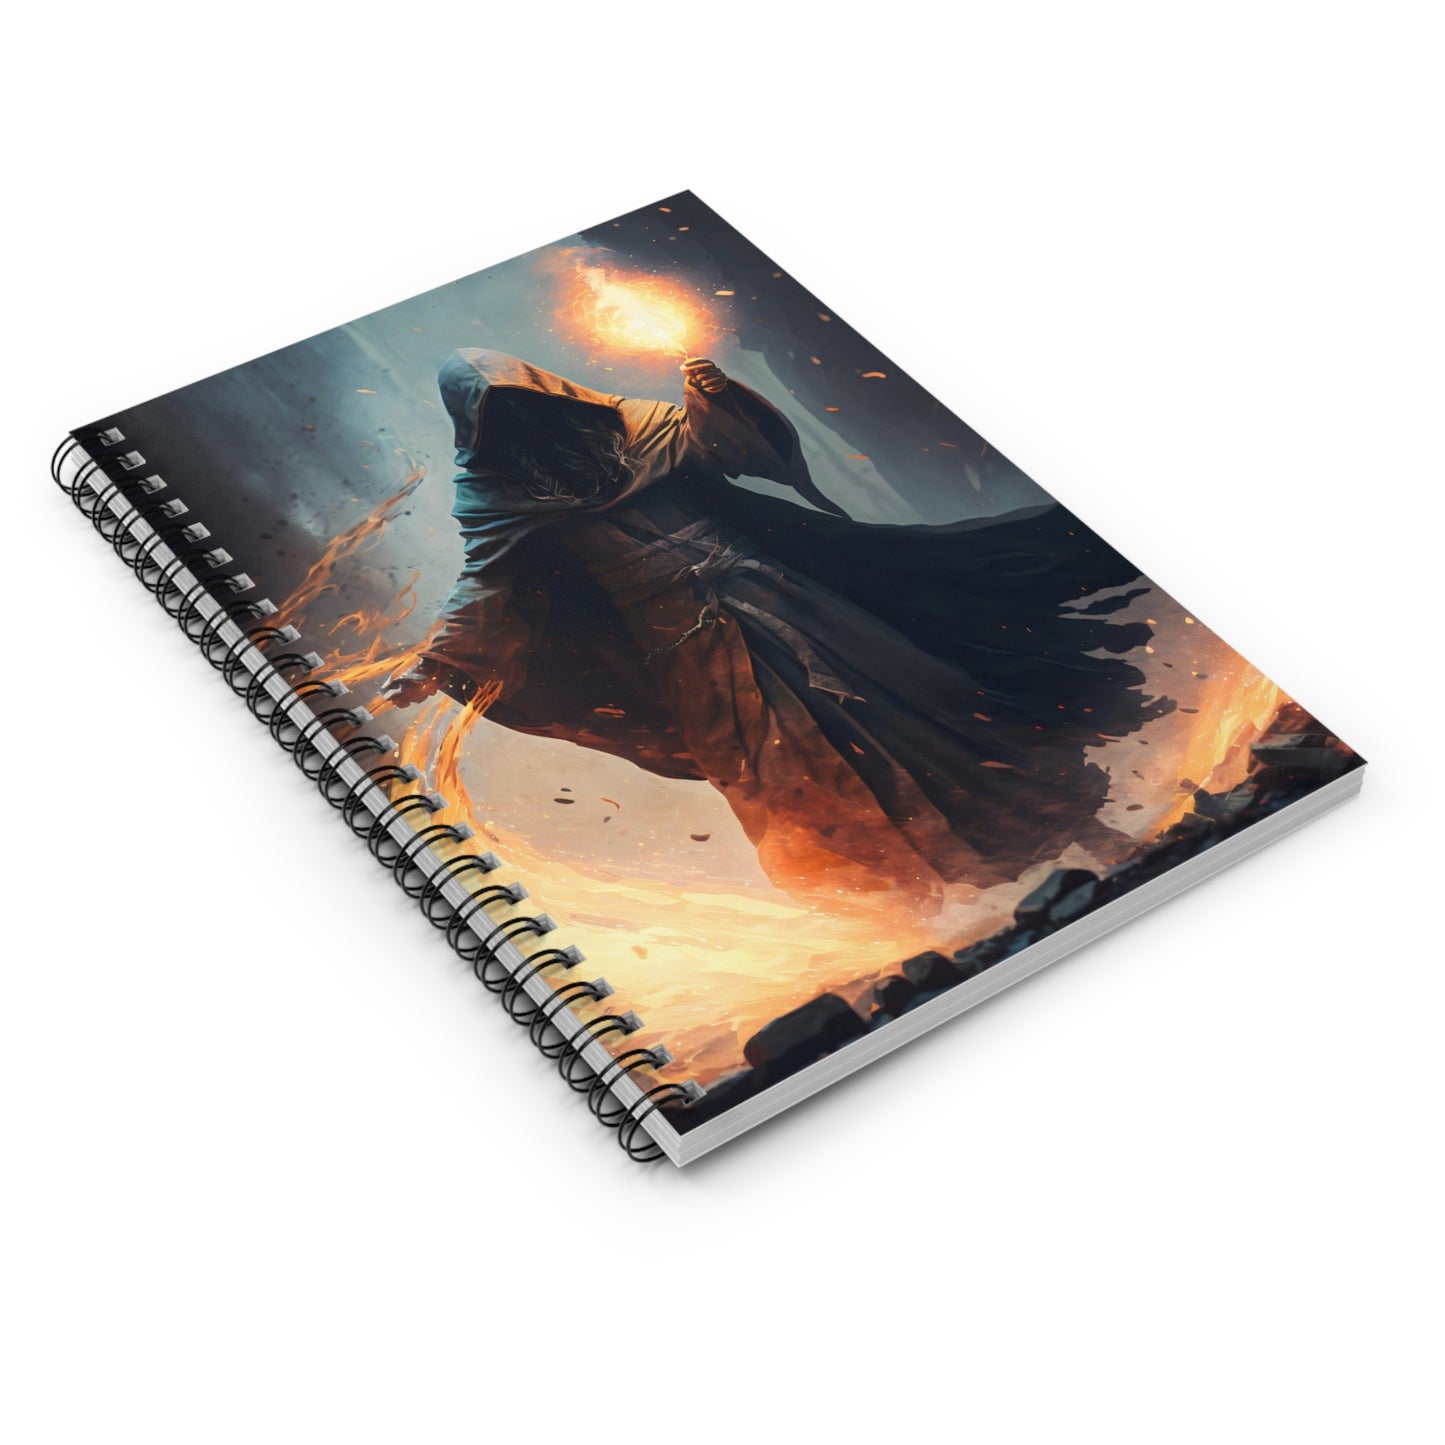 DnD Campaign Journal, Robed Wizard Casting a Fire Spell Spiral Notebook, Ruled Line, Tabletop Gaming Character Notepad, Pathfinder Journal